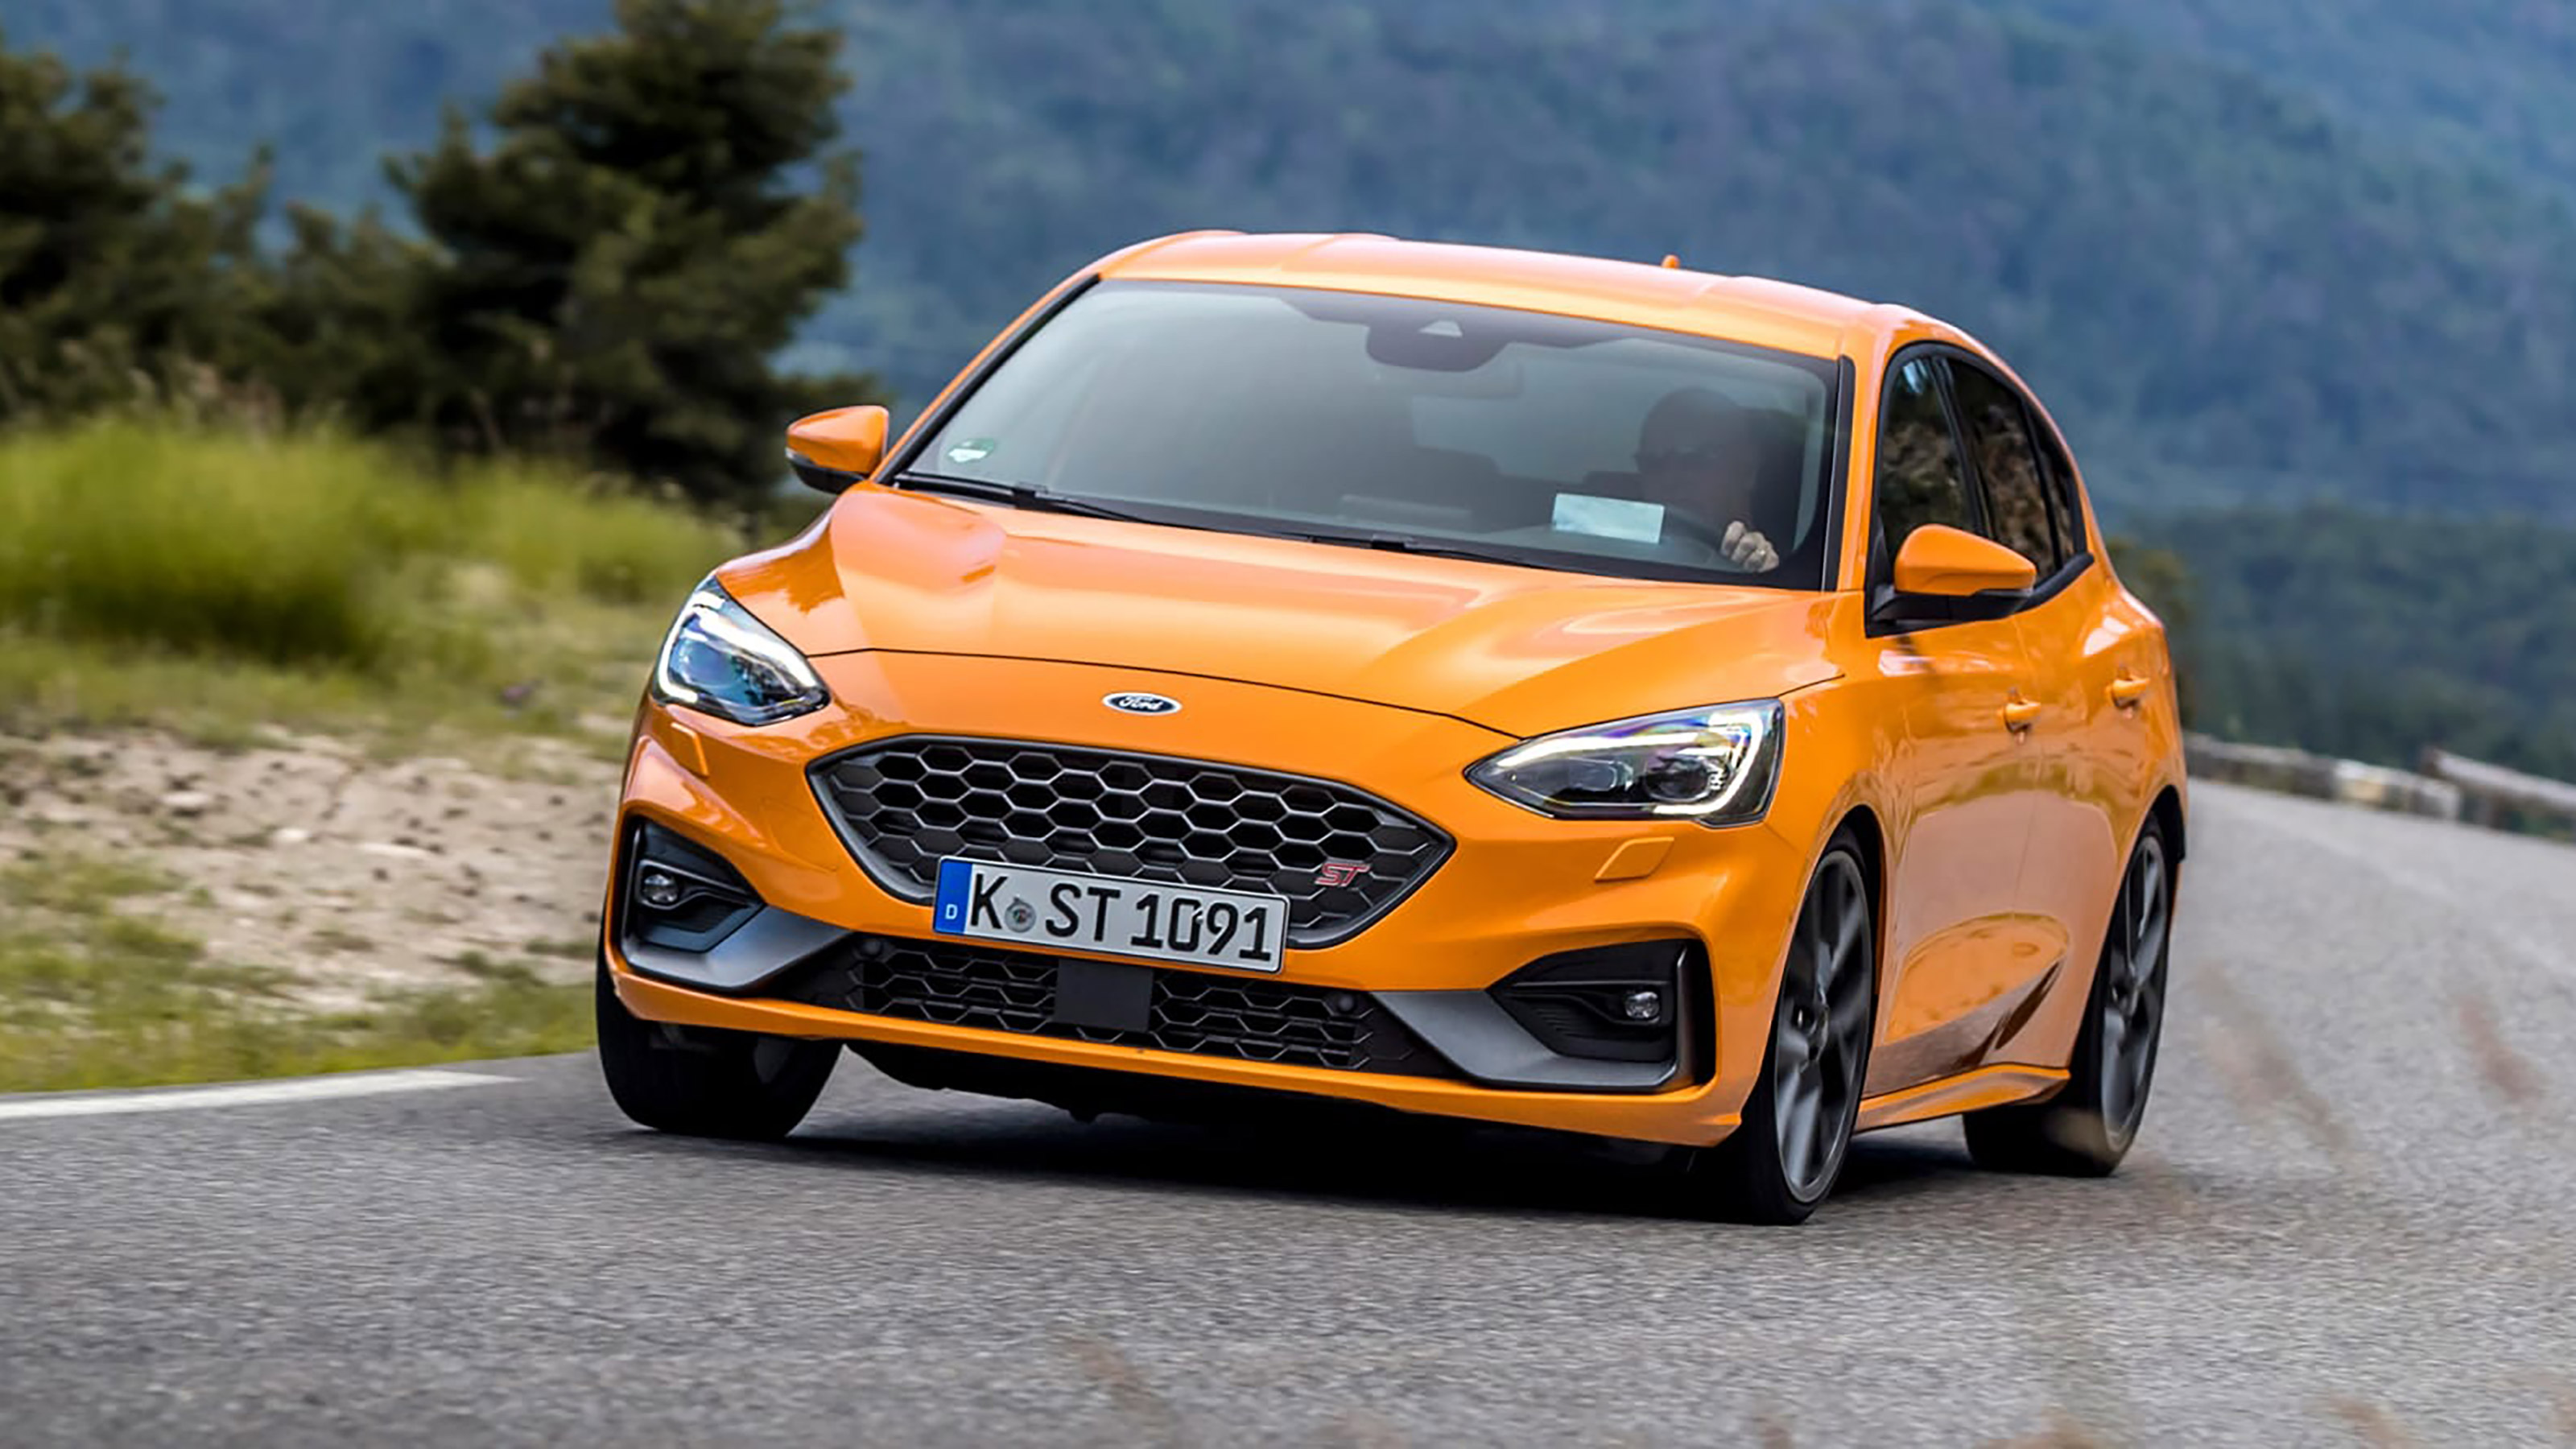 Ford Focus ST Mk2 Buying Guide  Tuning Tips  Fast Car